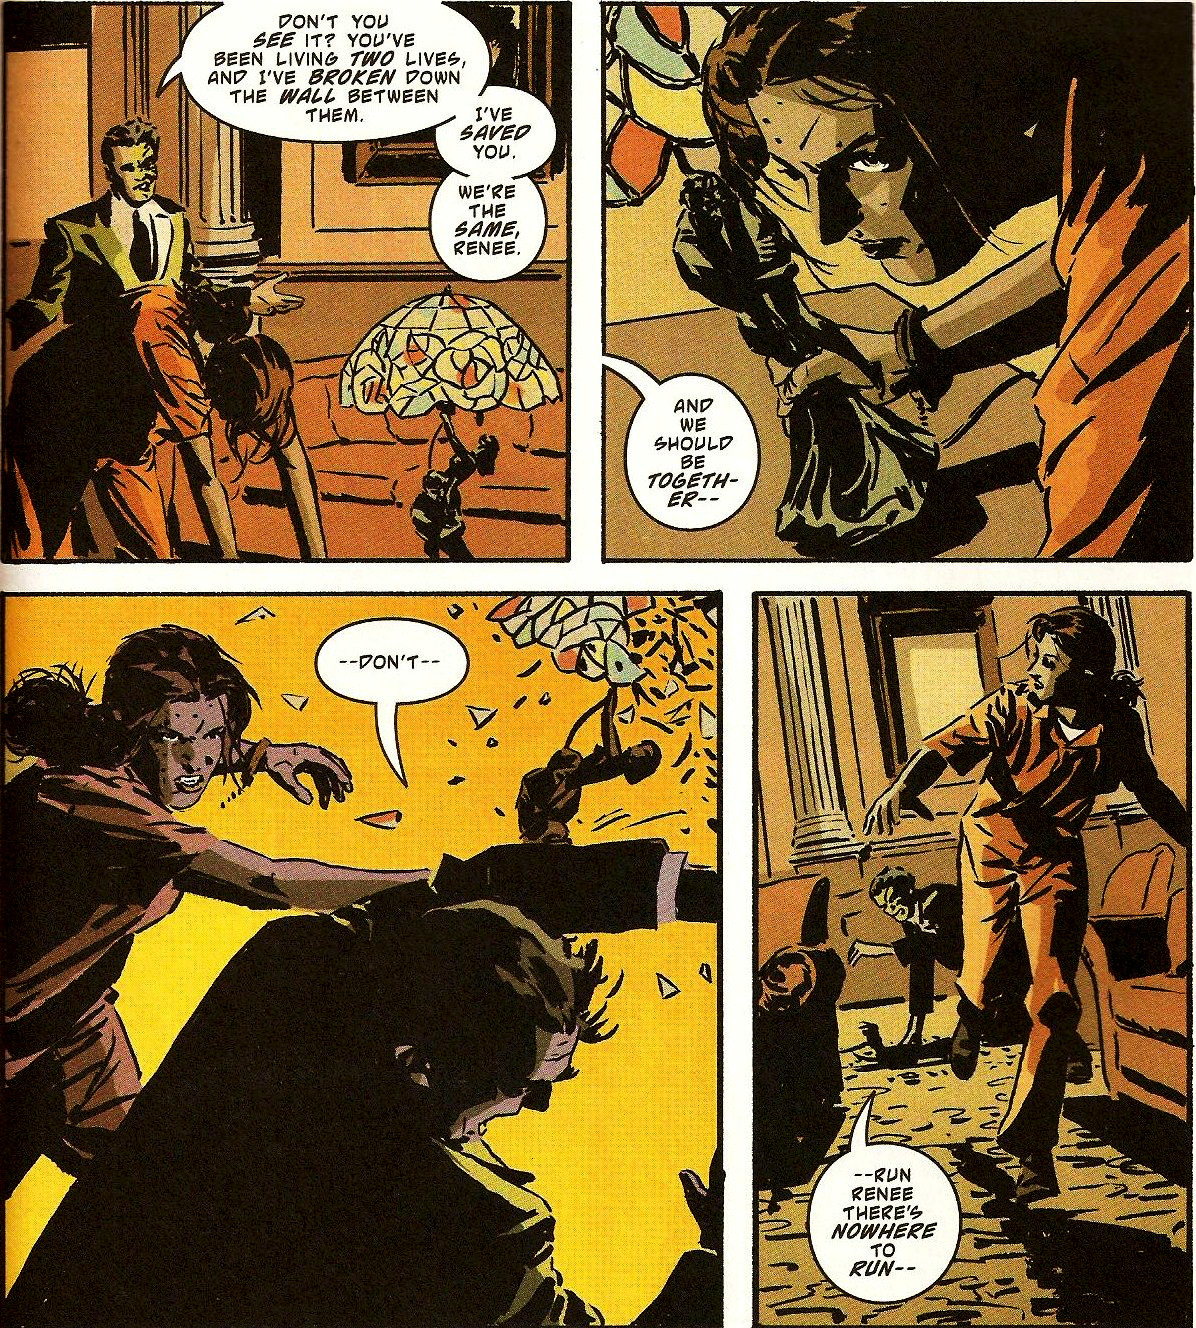 From Gotham Central #10 (2003)